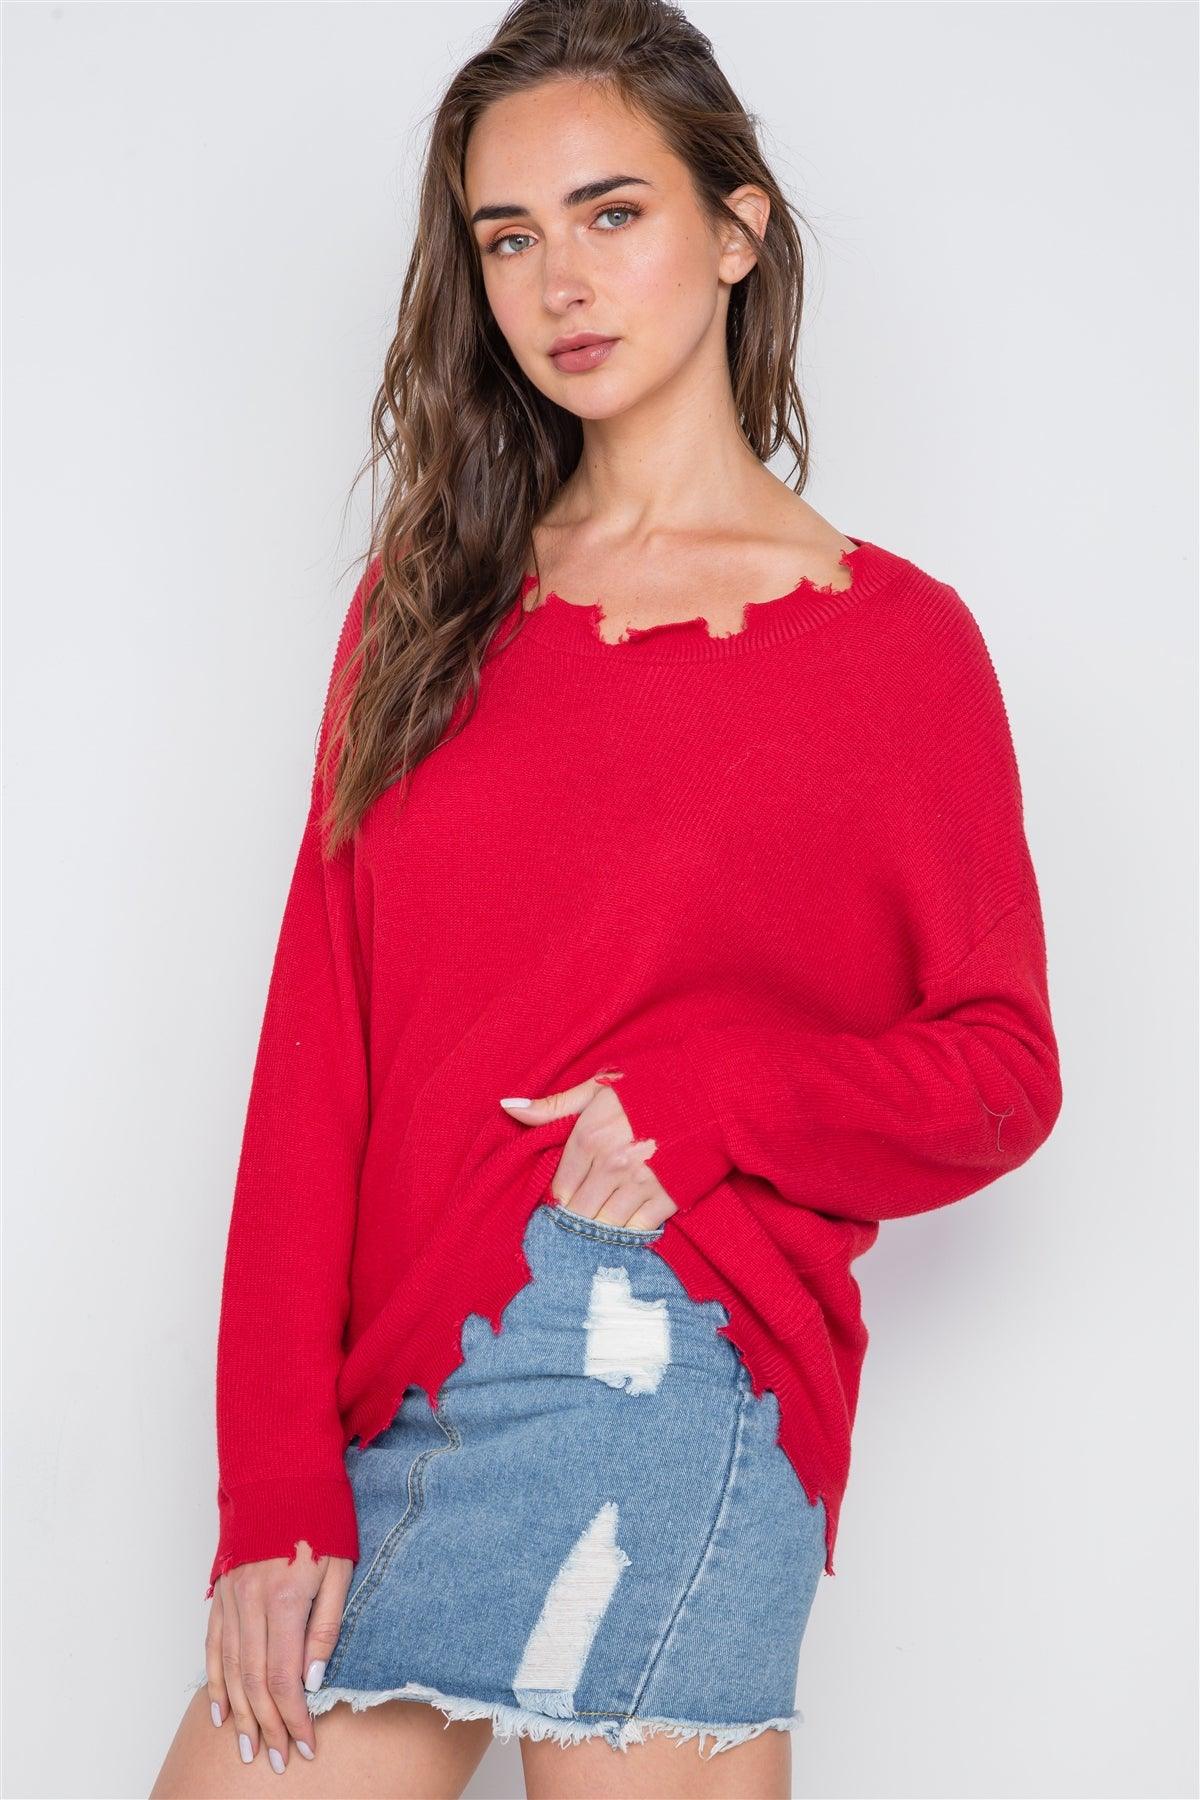 Tomato Red Distressed Pullover lightweight sweater / 3-2-1